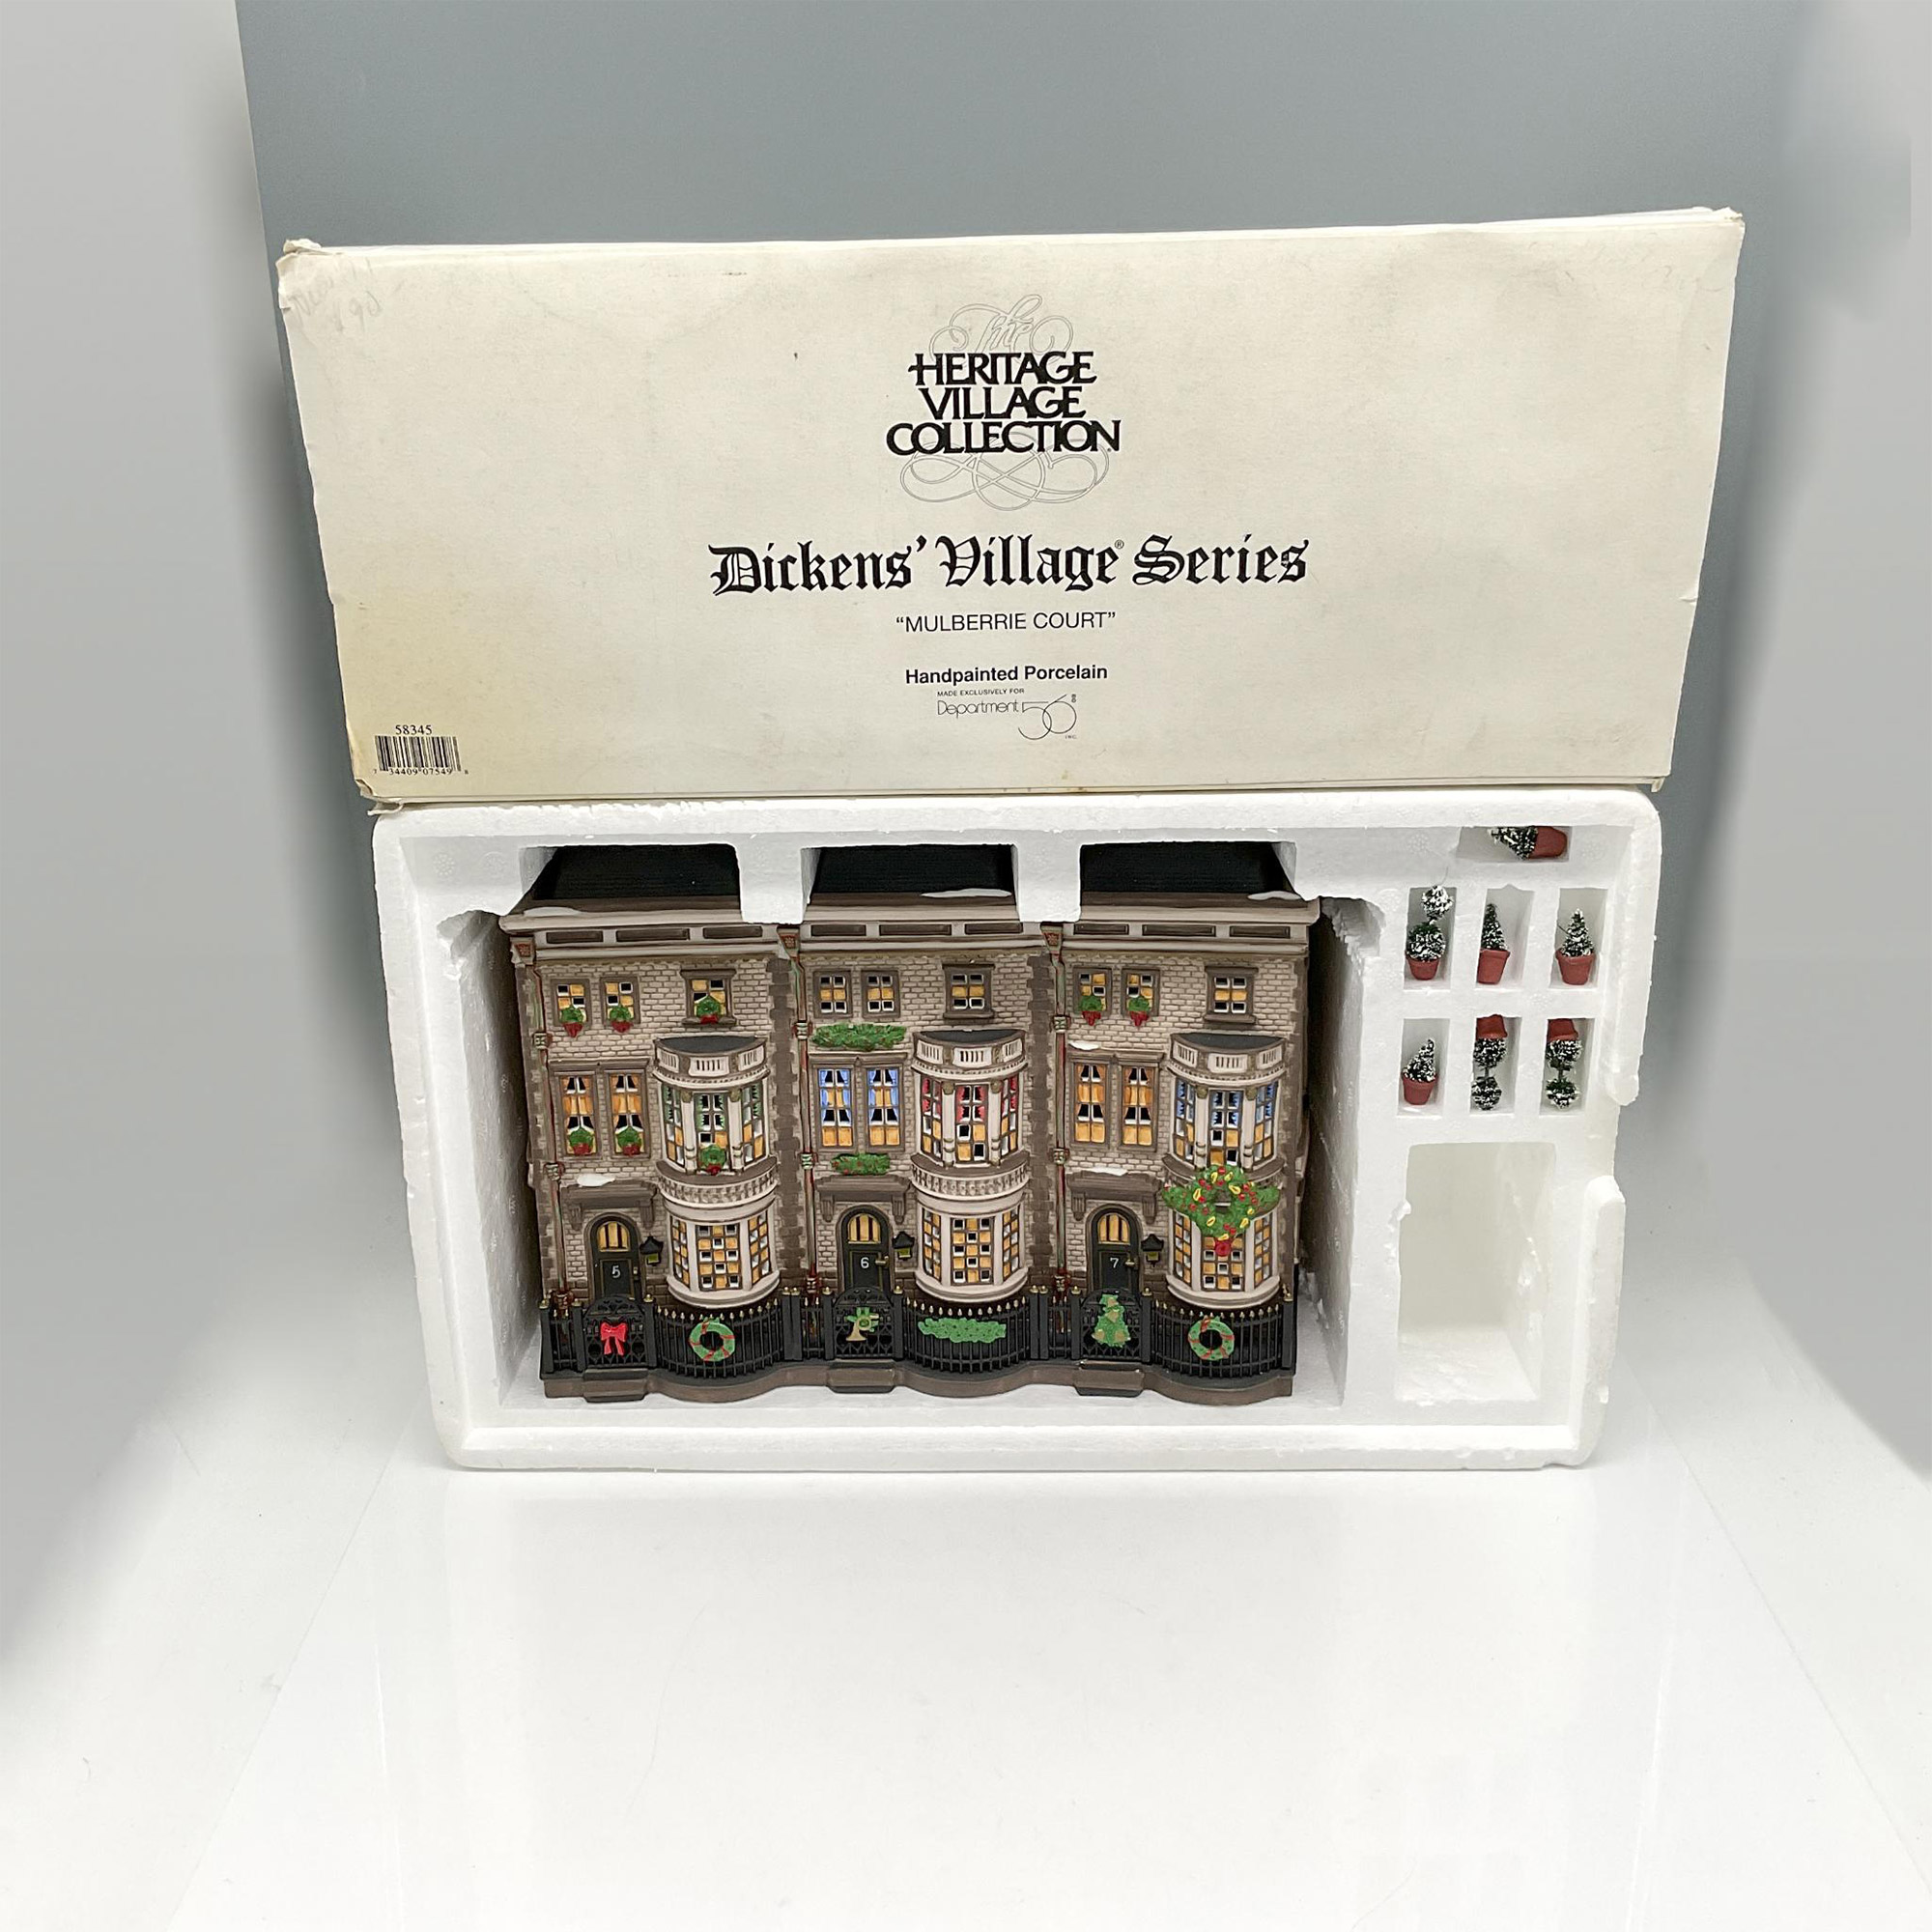 Department 56 Porcelain Dickens' Village Series, Mulberrie Court - Image 5 of 5